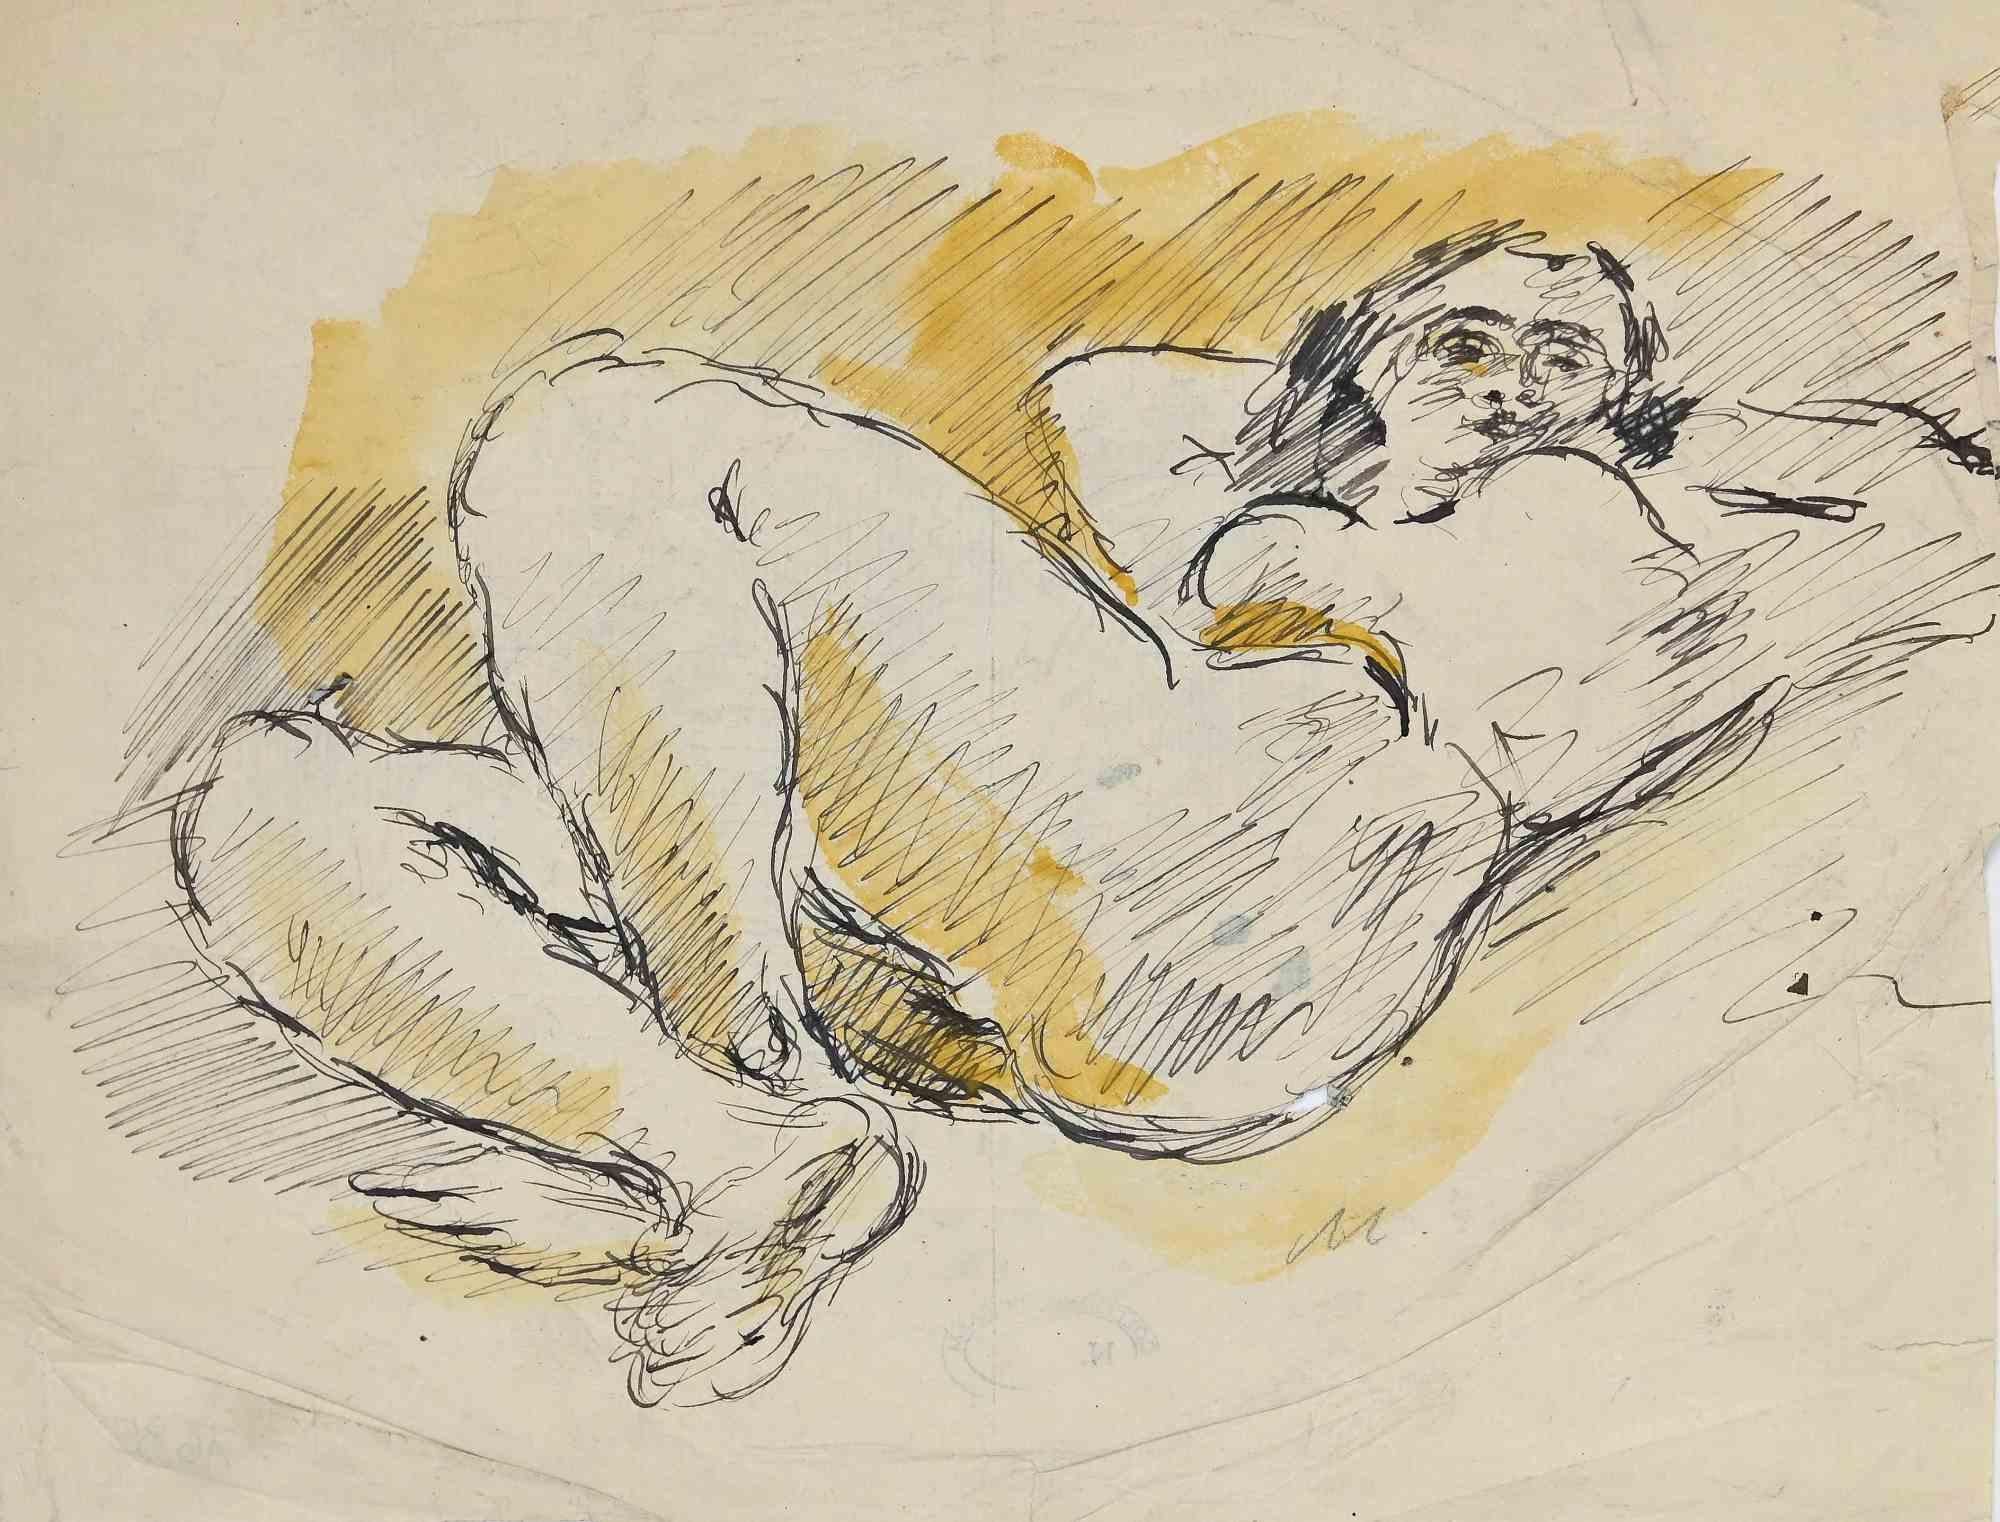 Reclined Nude is an original China Ink Drawing and watercolour realized by Mino Maccari in mid-20th century.

Good condition except for crumpled  cream colored paper.

Monogrammed by the artist with pencil.

Mino Maccari (1898-1989) was an Italian